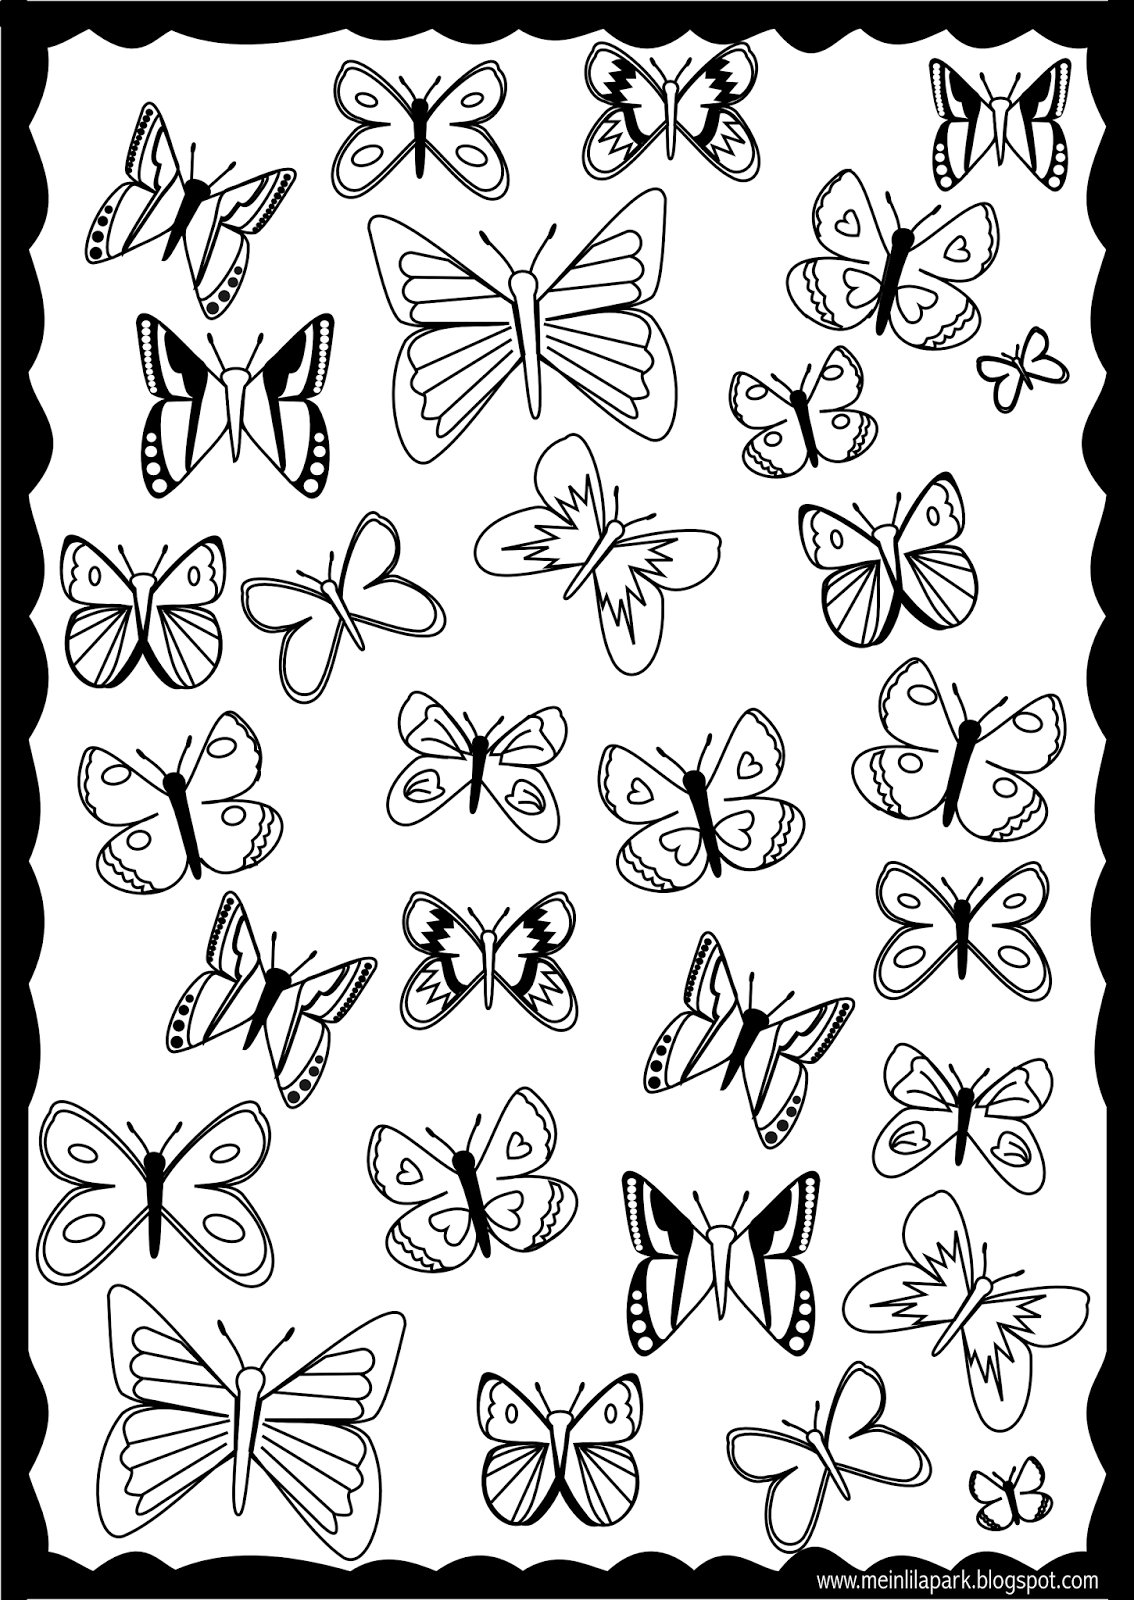 Printable Butterfly Pictures Free